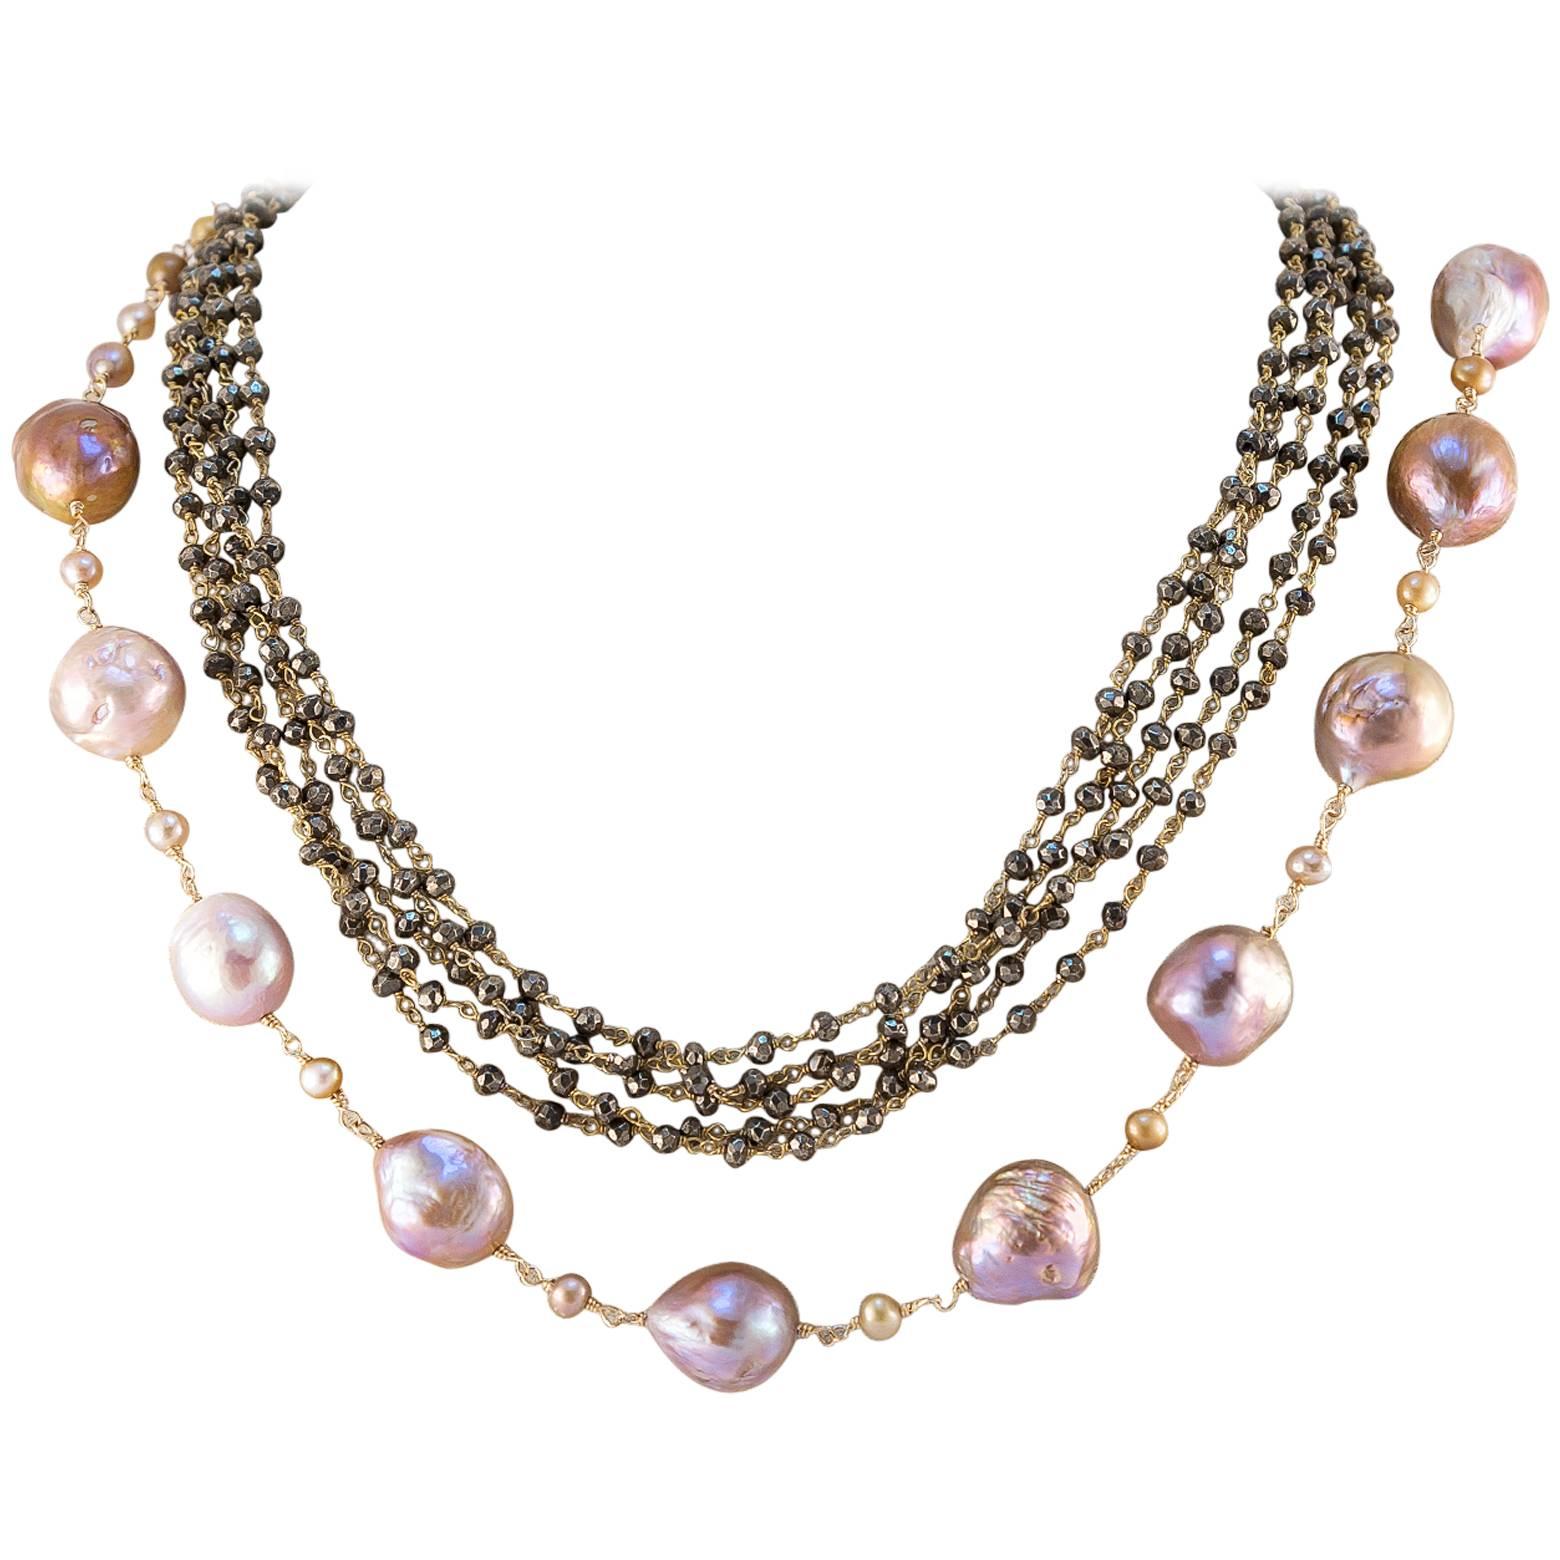 Matinee Length Fresh Water Pearl Necklace with Hematite Beads